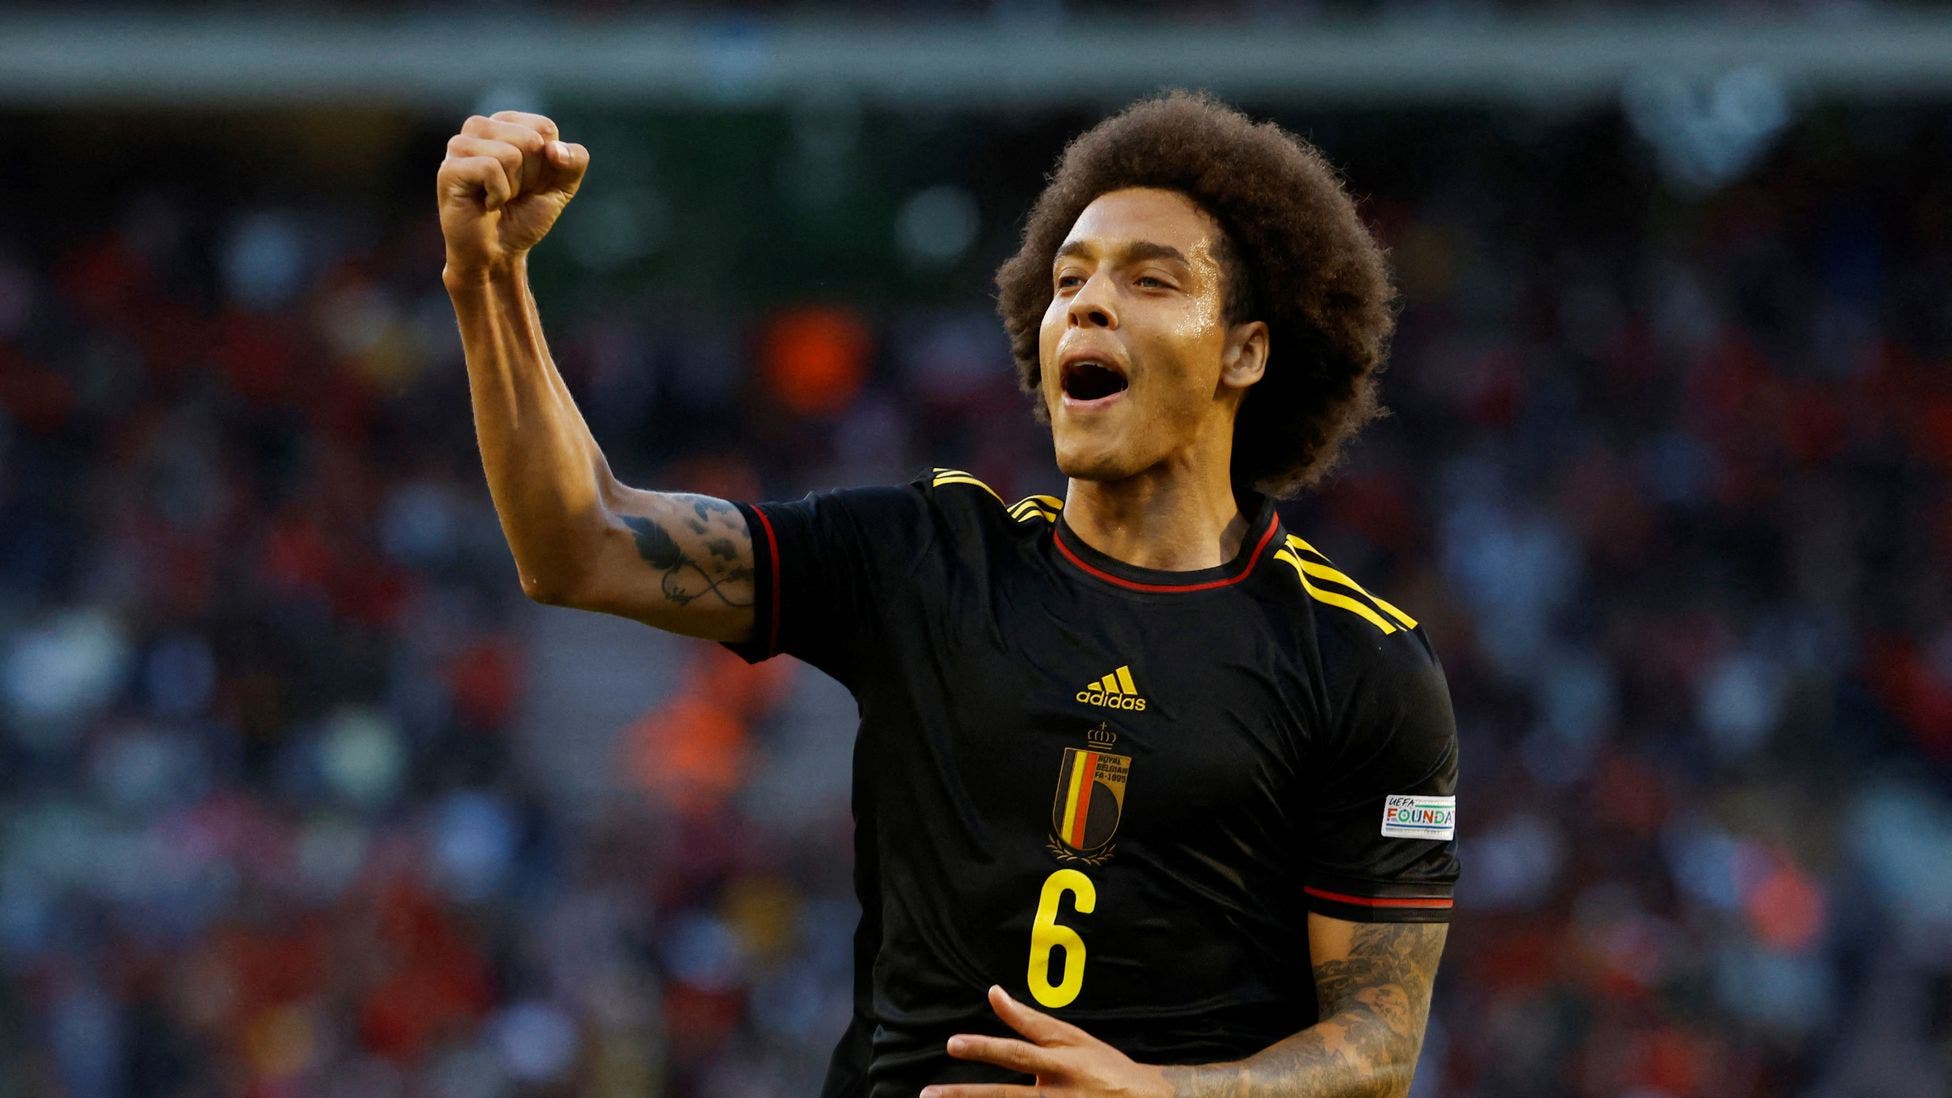 Valencia CF wants to take advantage of Atlético's shock wave with Witsel
